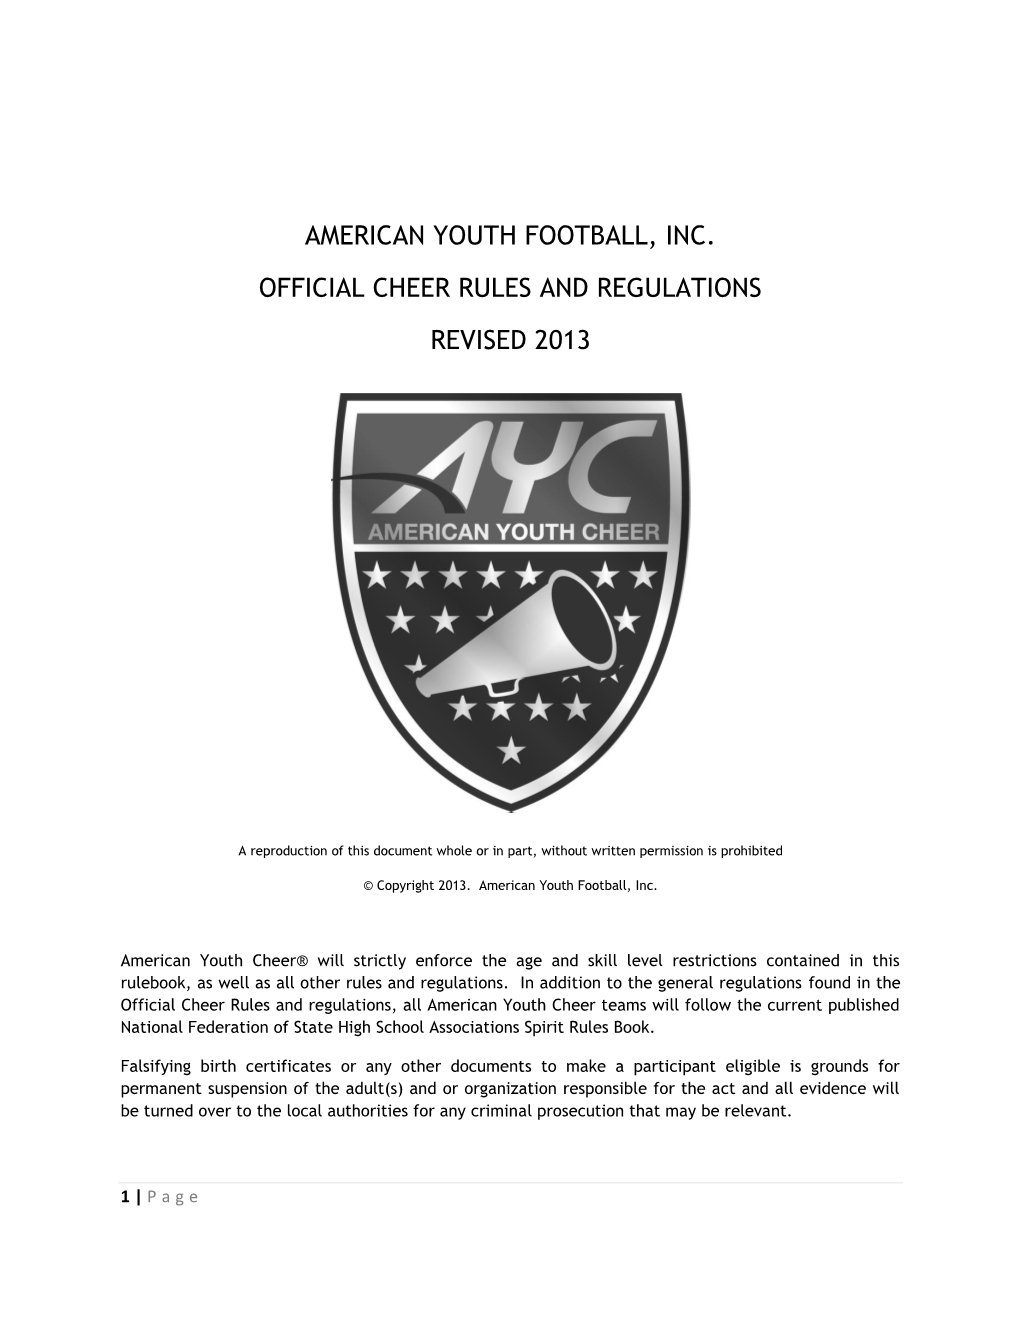 American Youth Football, Inc. Official Cheer Rules and Regulations Revised 2013